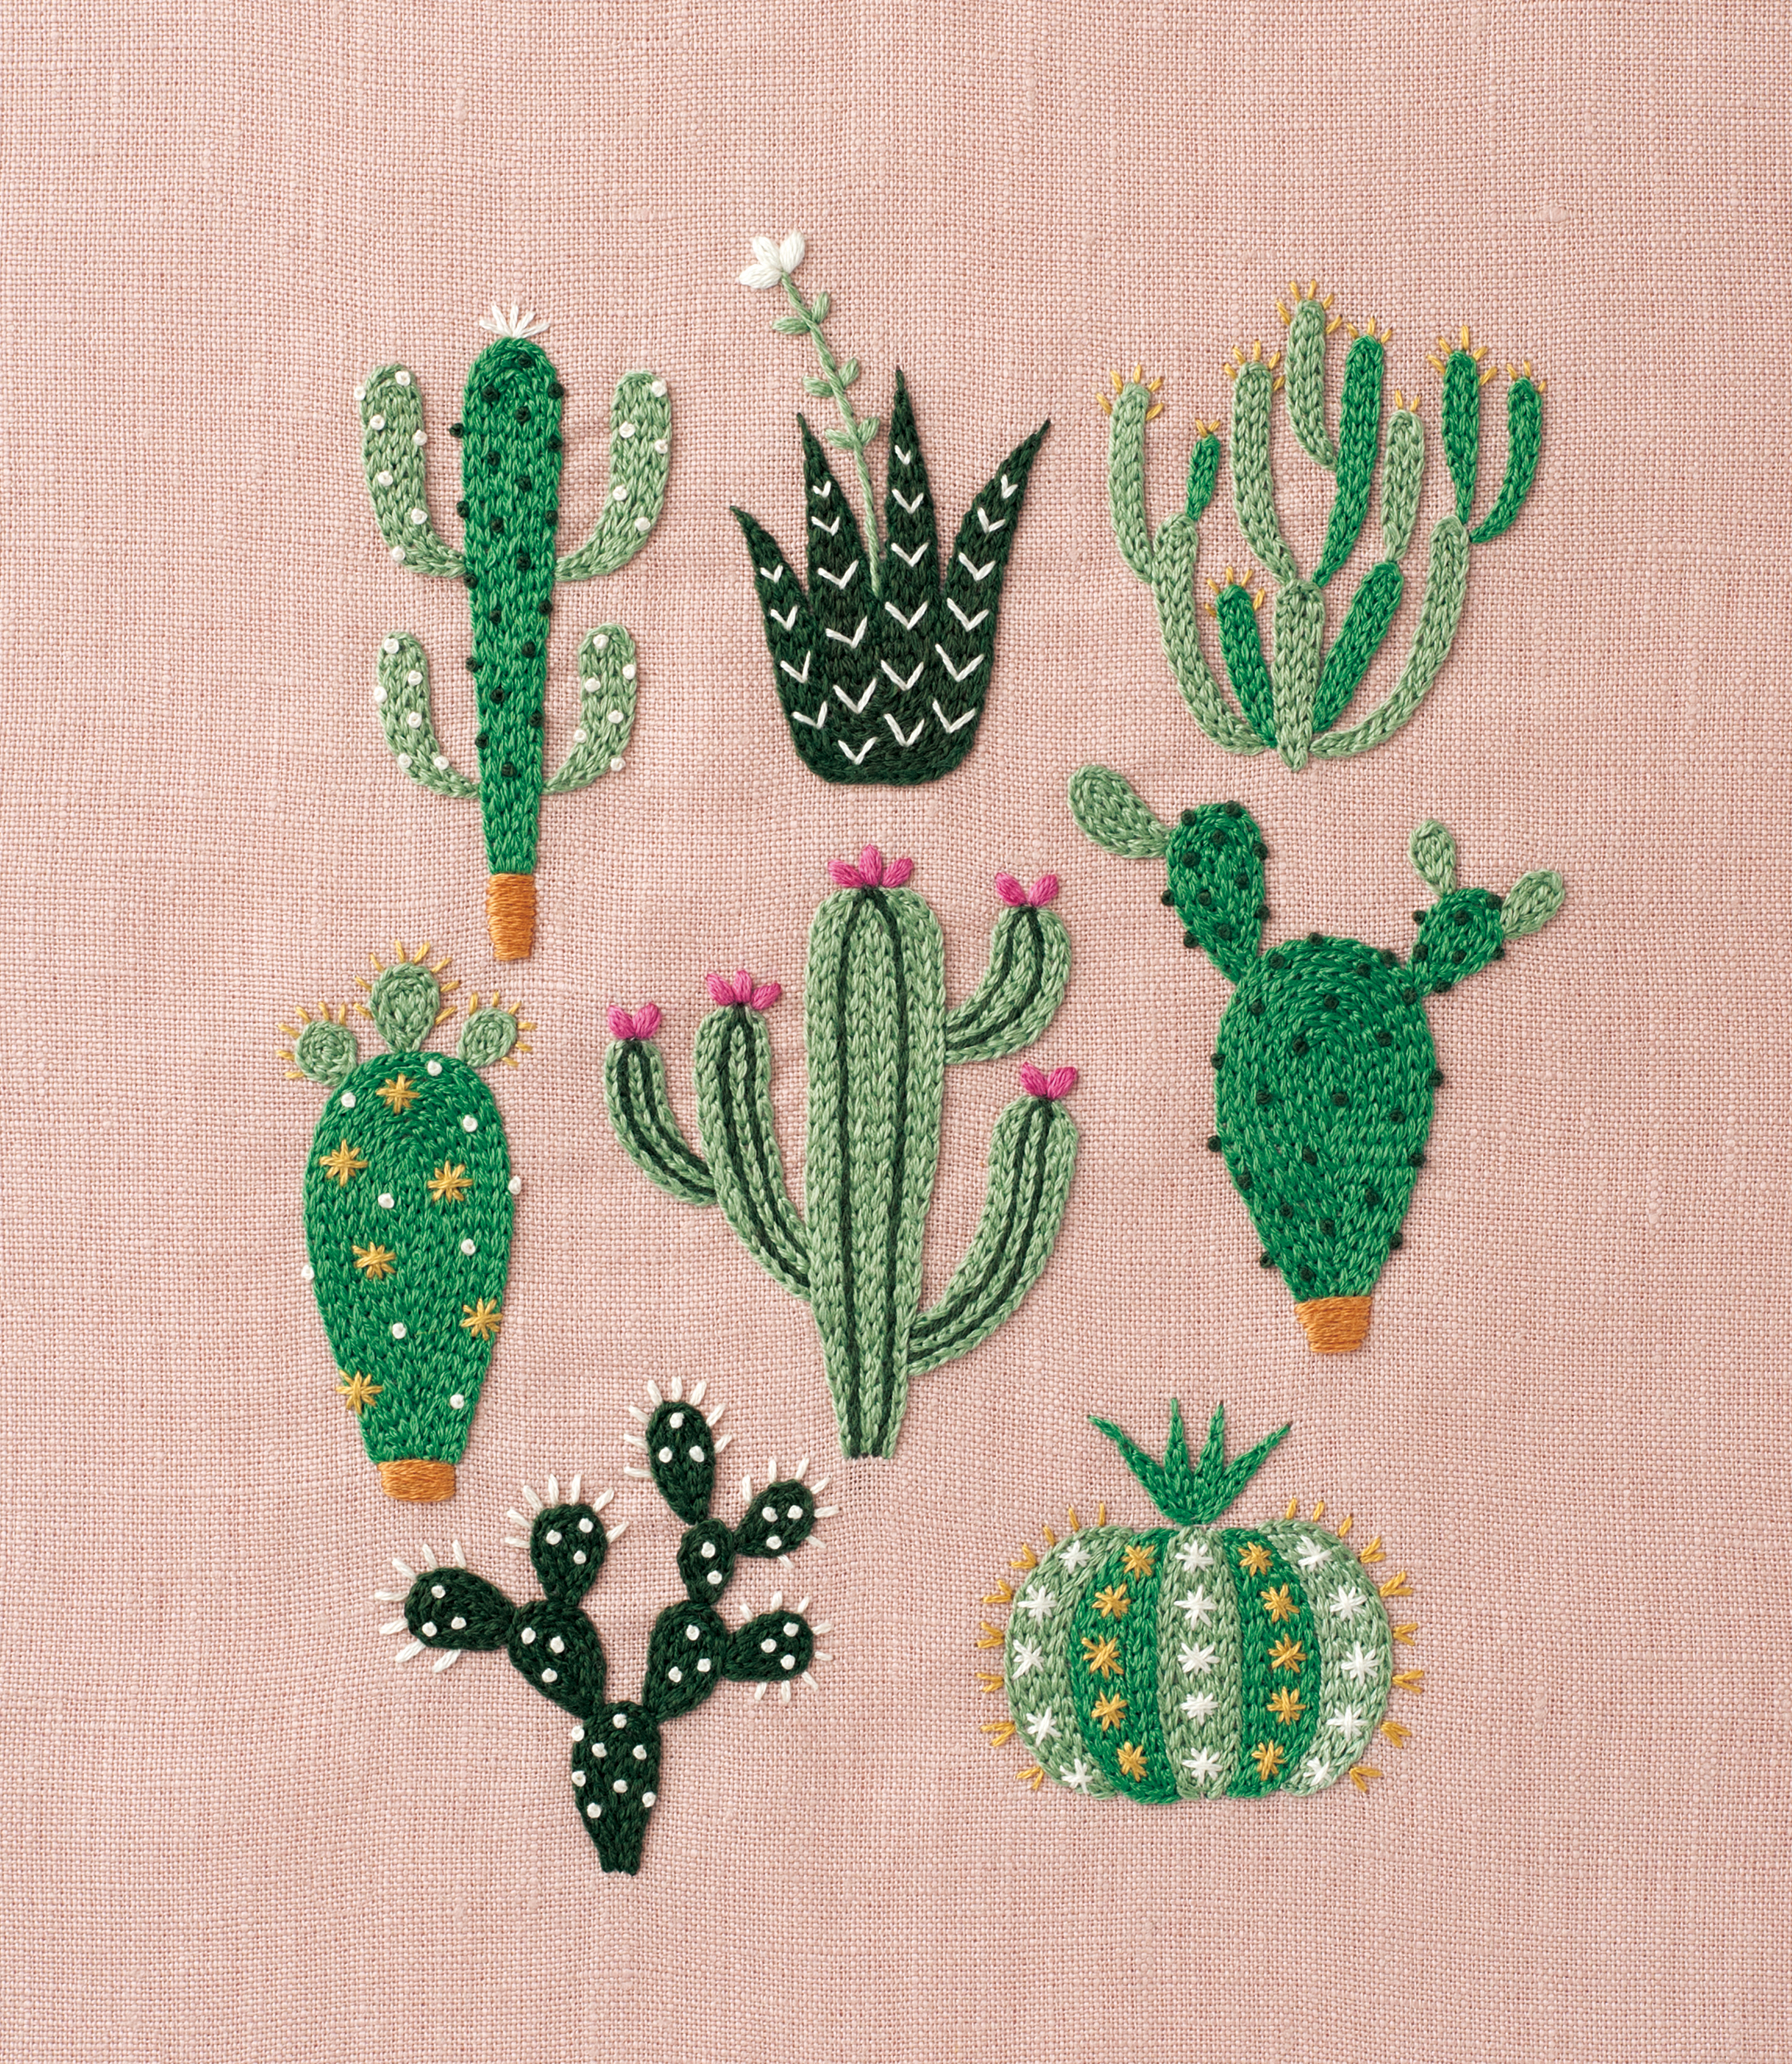 French Embroidery Patterns Diy Floral Cactus Embroidery Projects From A Year Of Embroidery